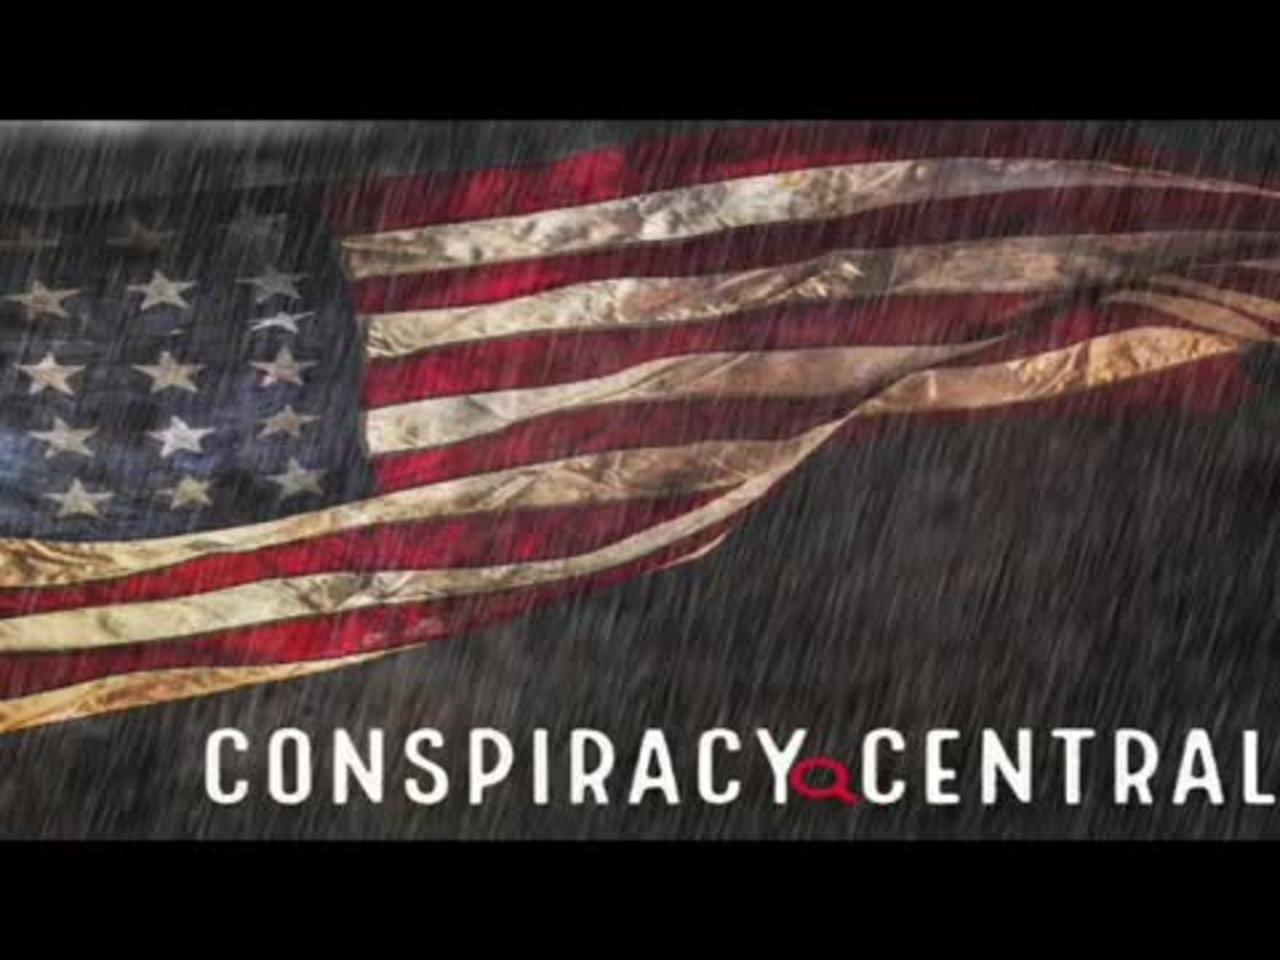 Take 2 Conspiracy Central 6/26/22